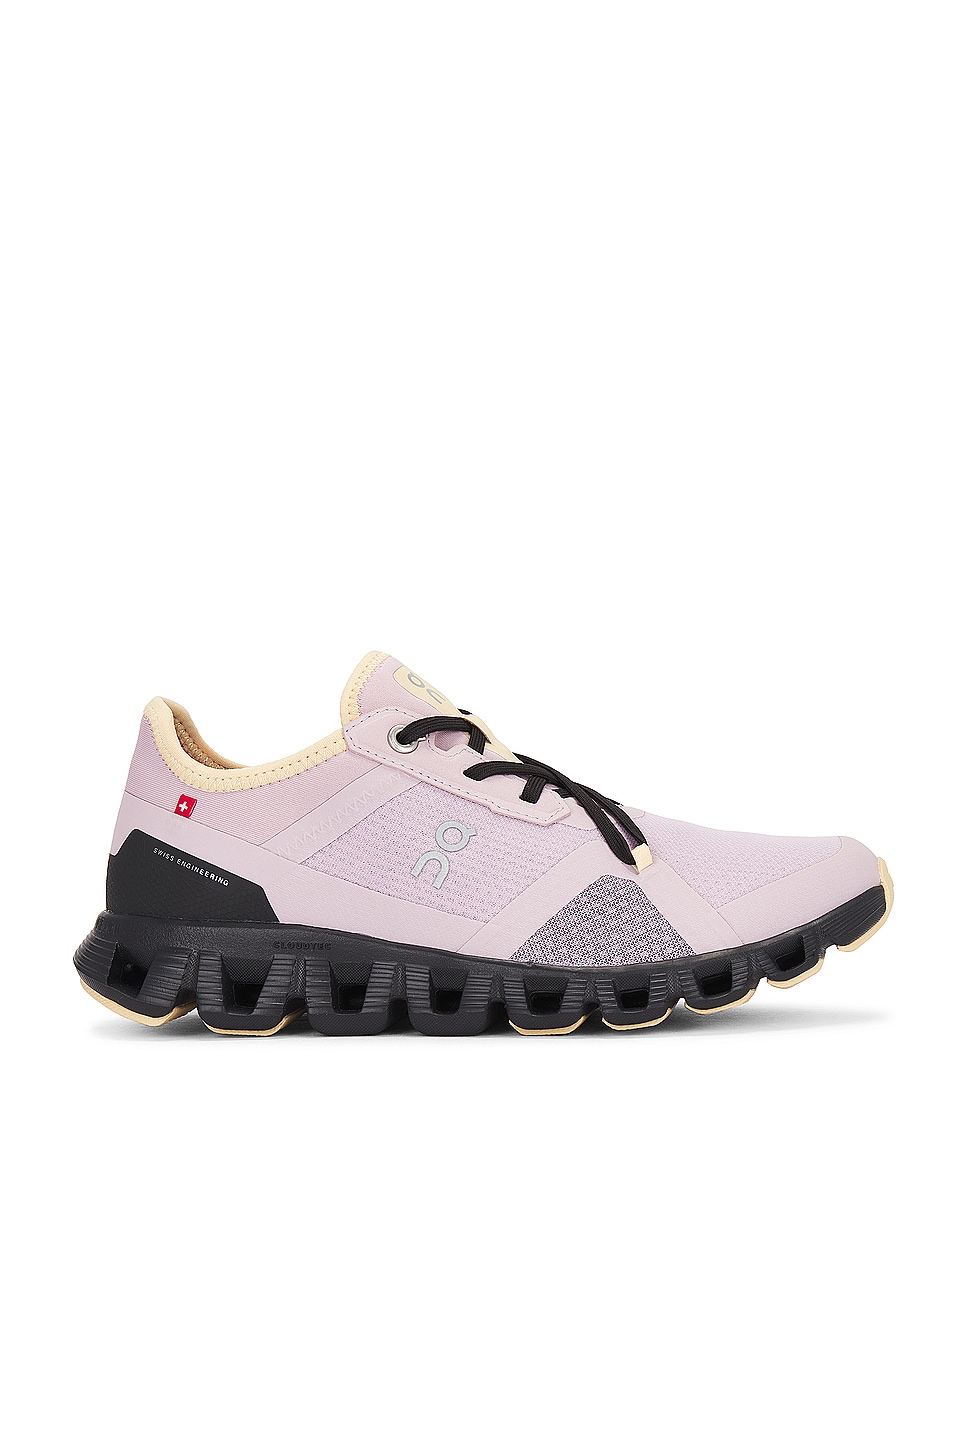 Image 1 of On Cloud X 3 Ad Sneaker in Mauve & Magnet